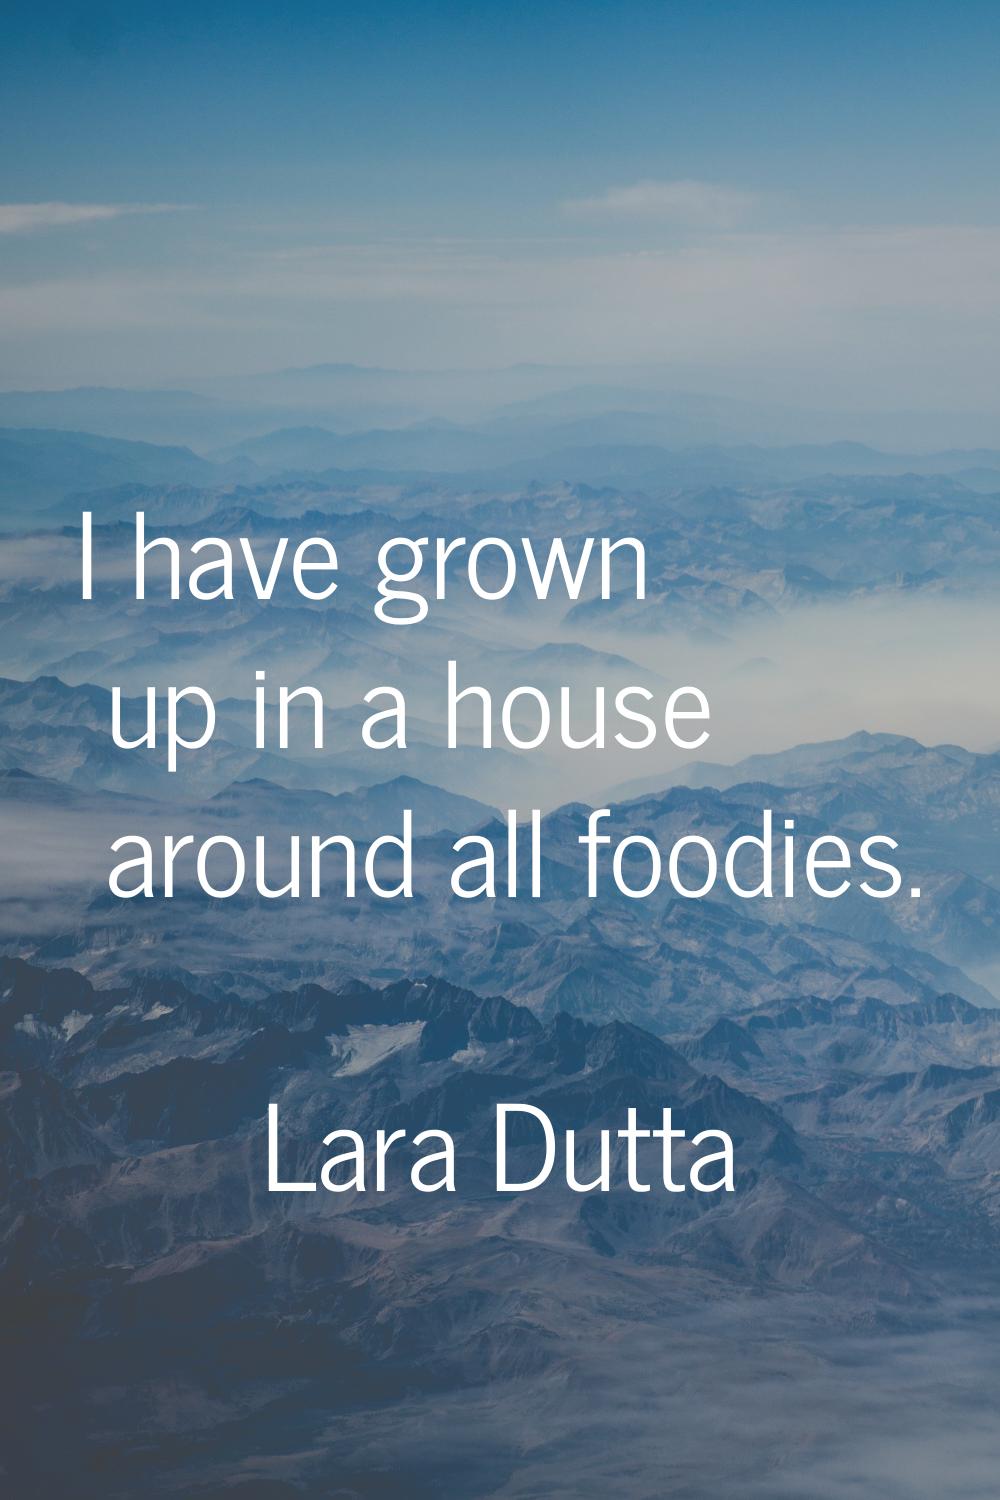 I have grown up in a house around all foodies.